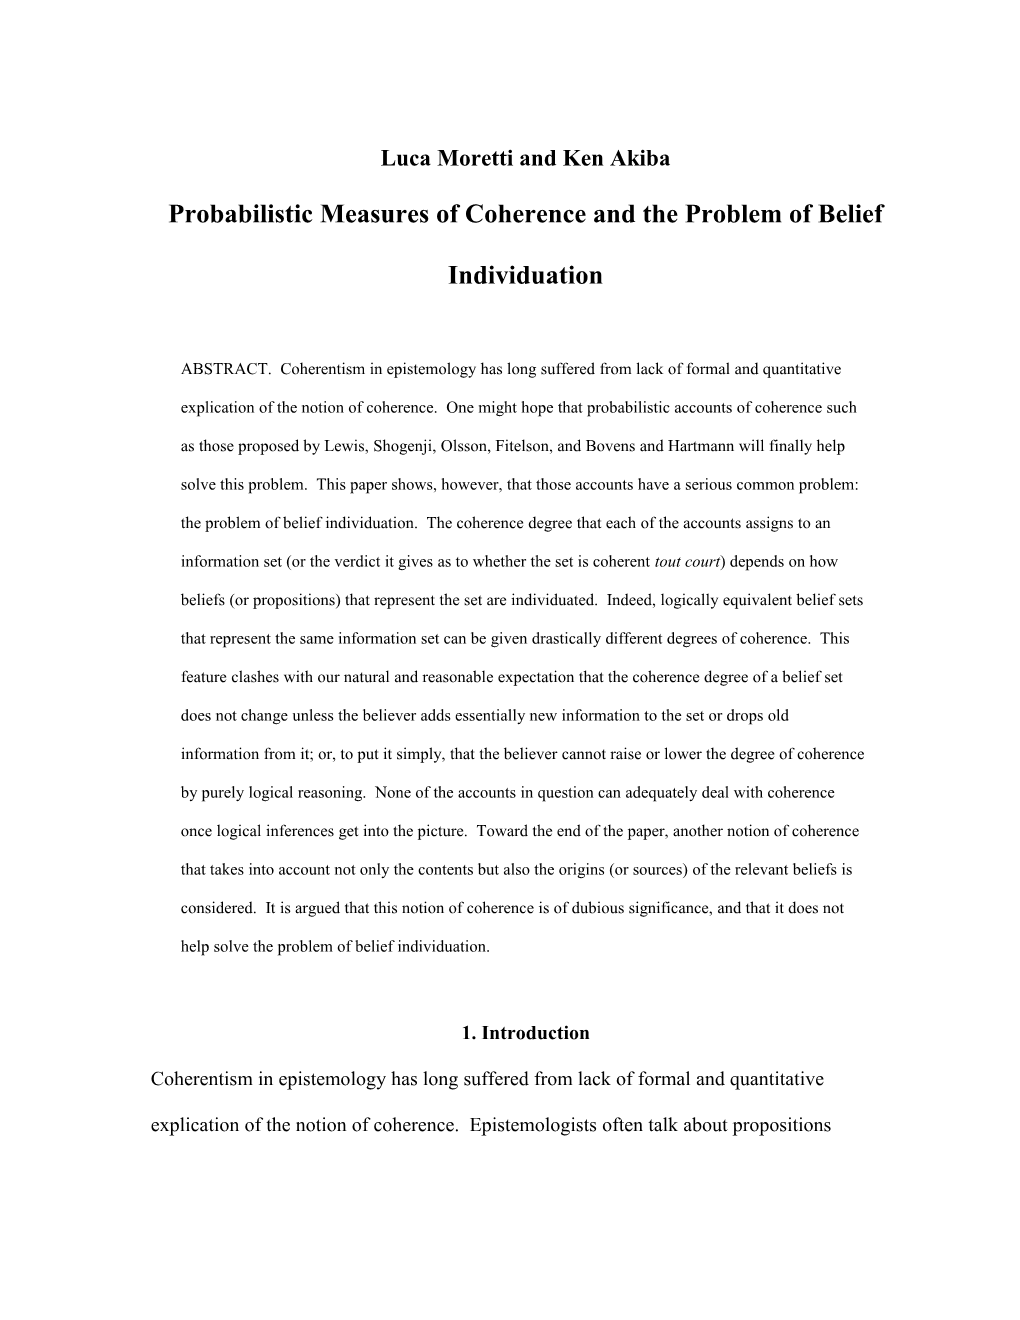 Probabilistic Measures of Coherence and the Problem of Belief Individuation